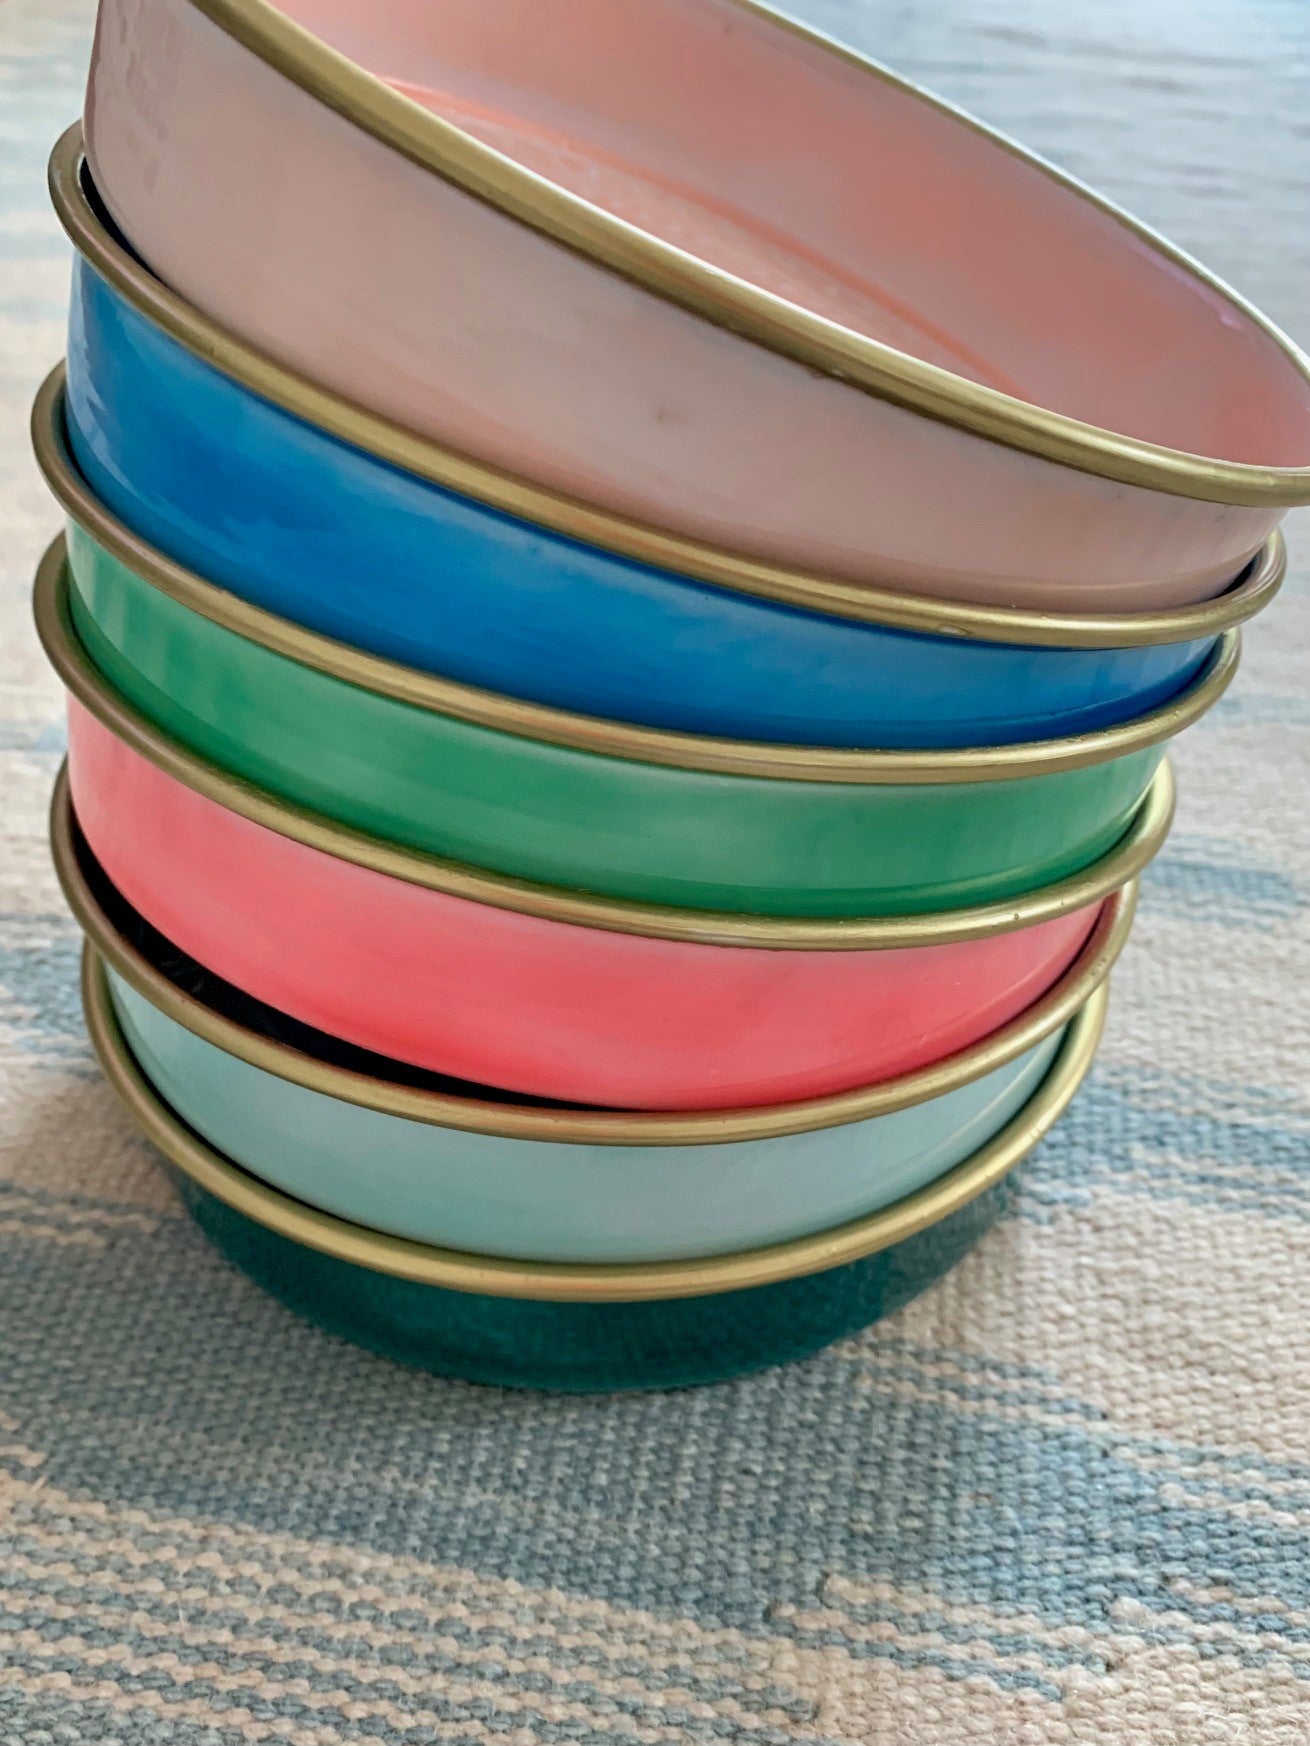 6 colourful enamel trays in rainbow colours all stacked together.